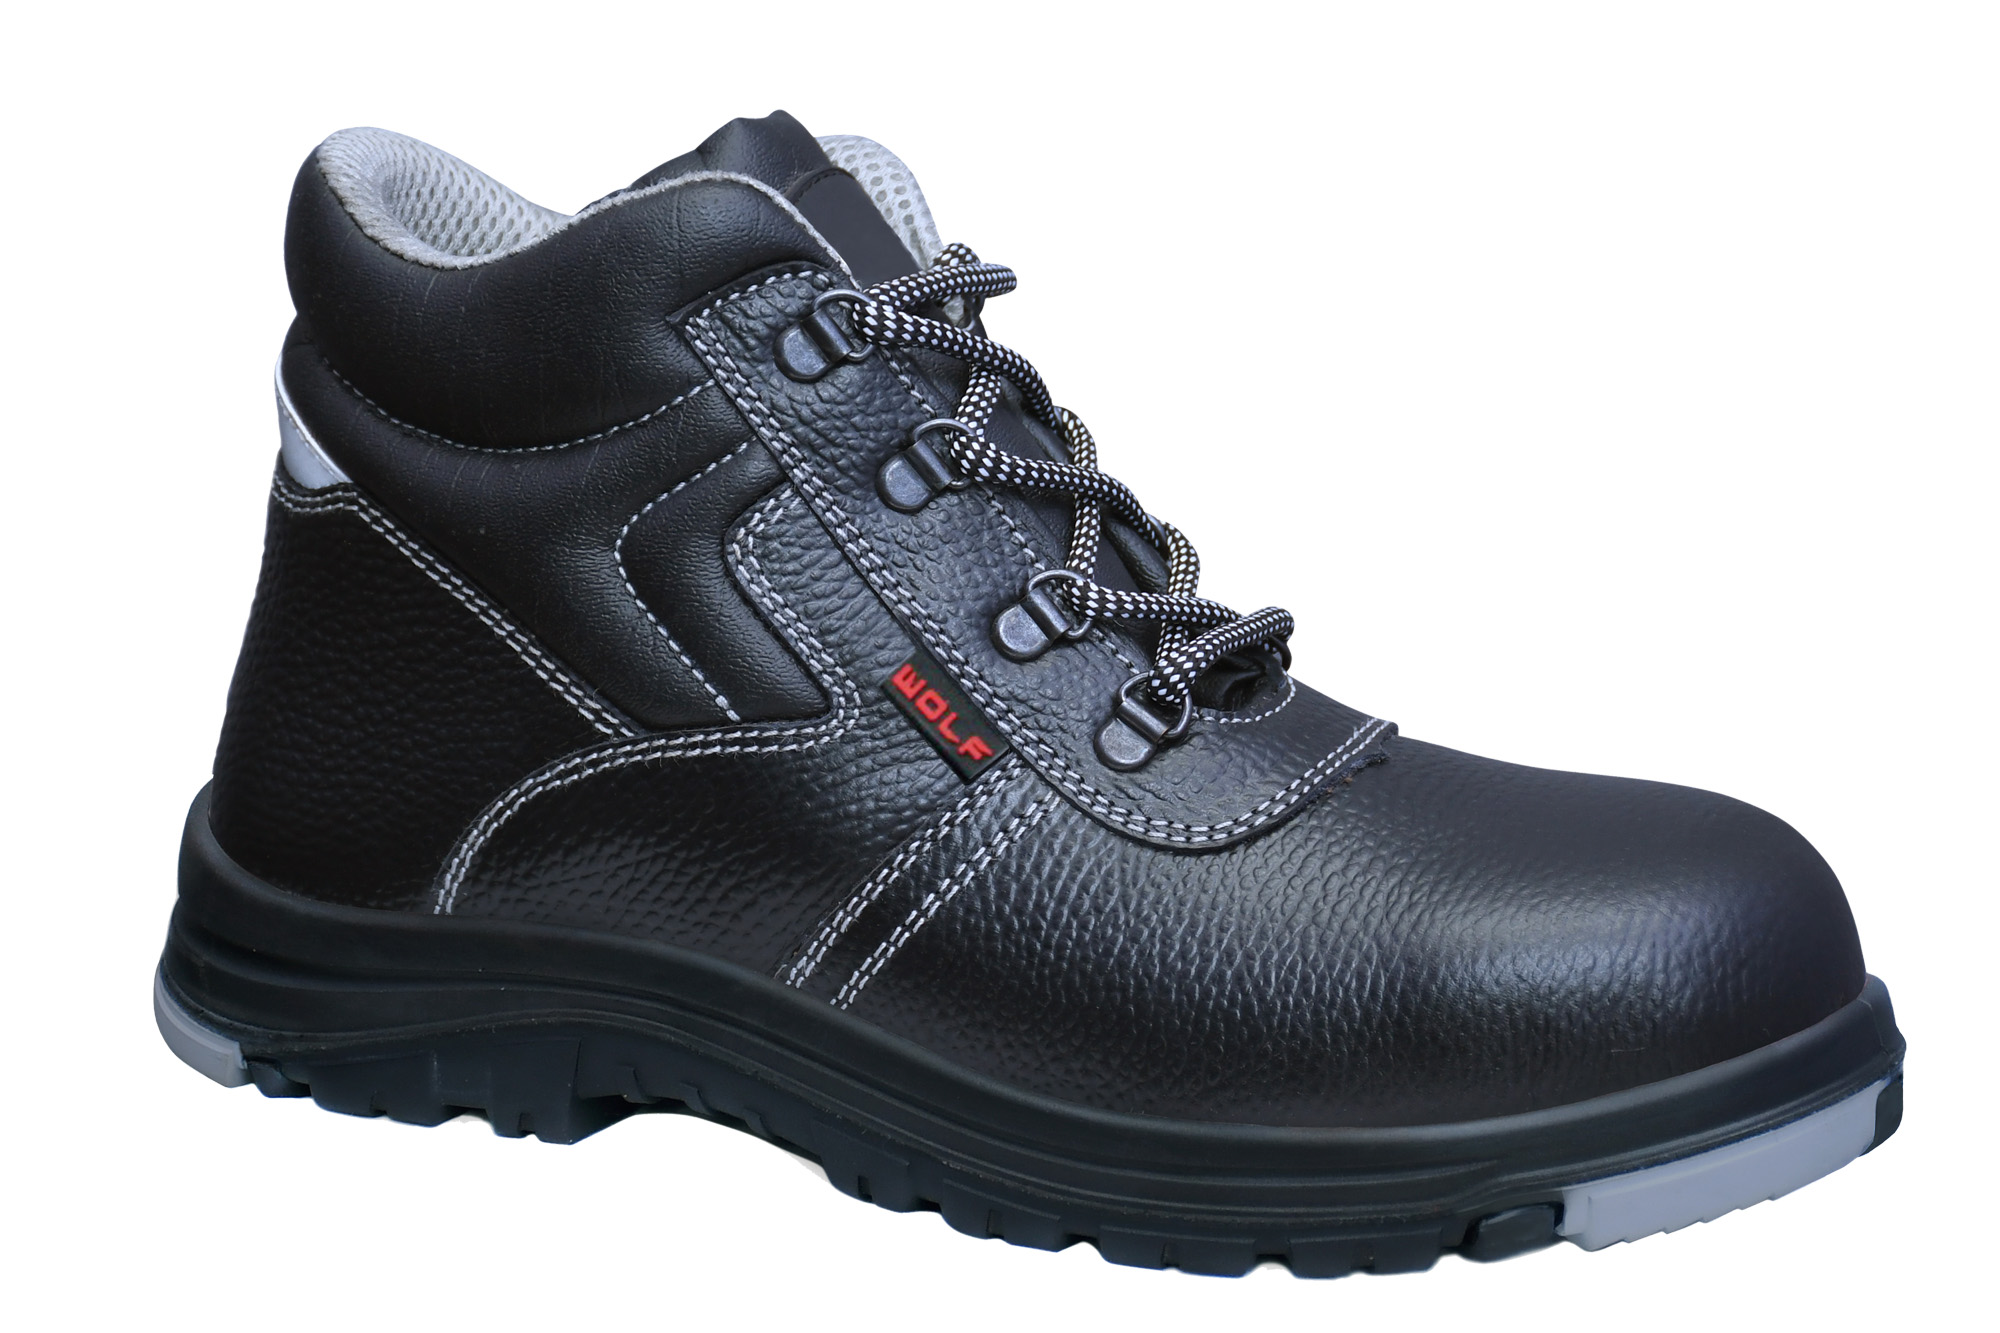 Double Density PU/Rubber Safety Boot